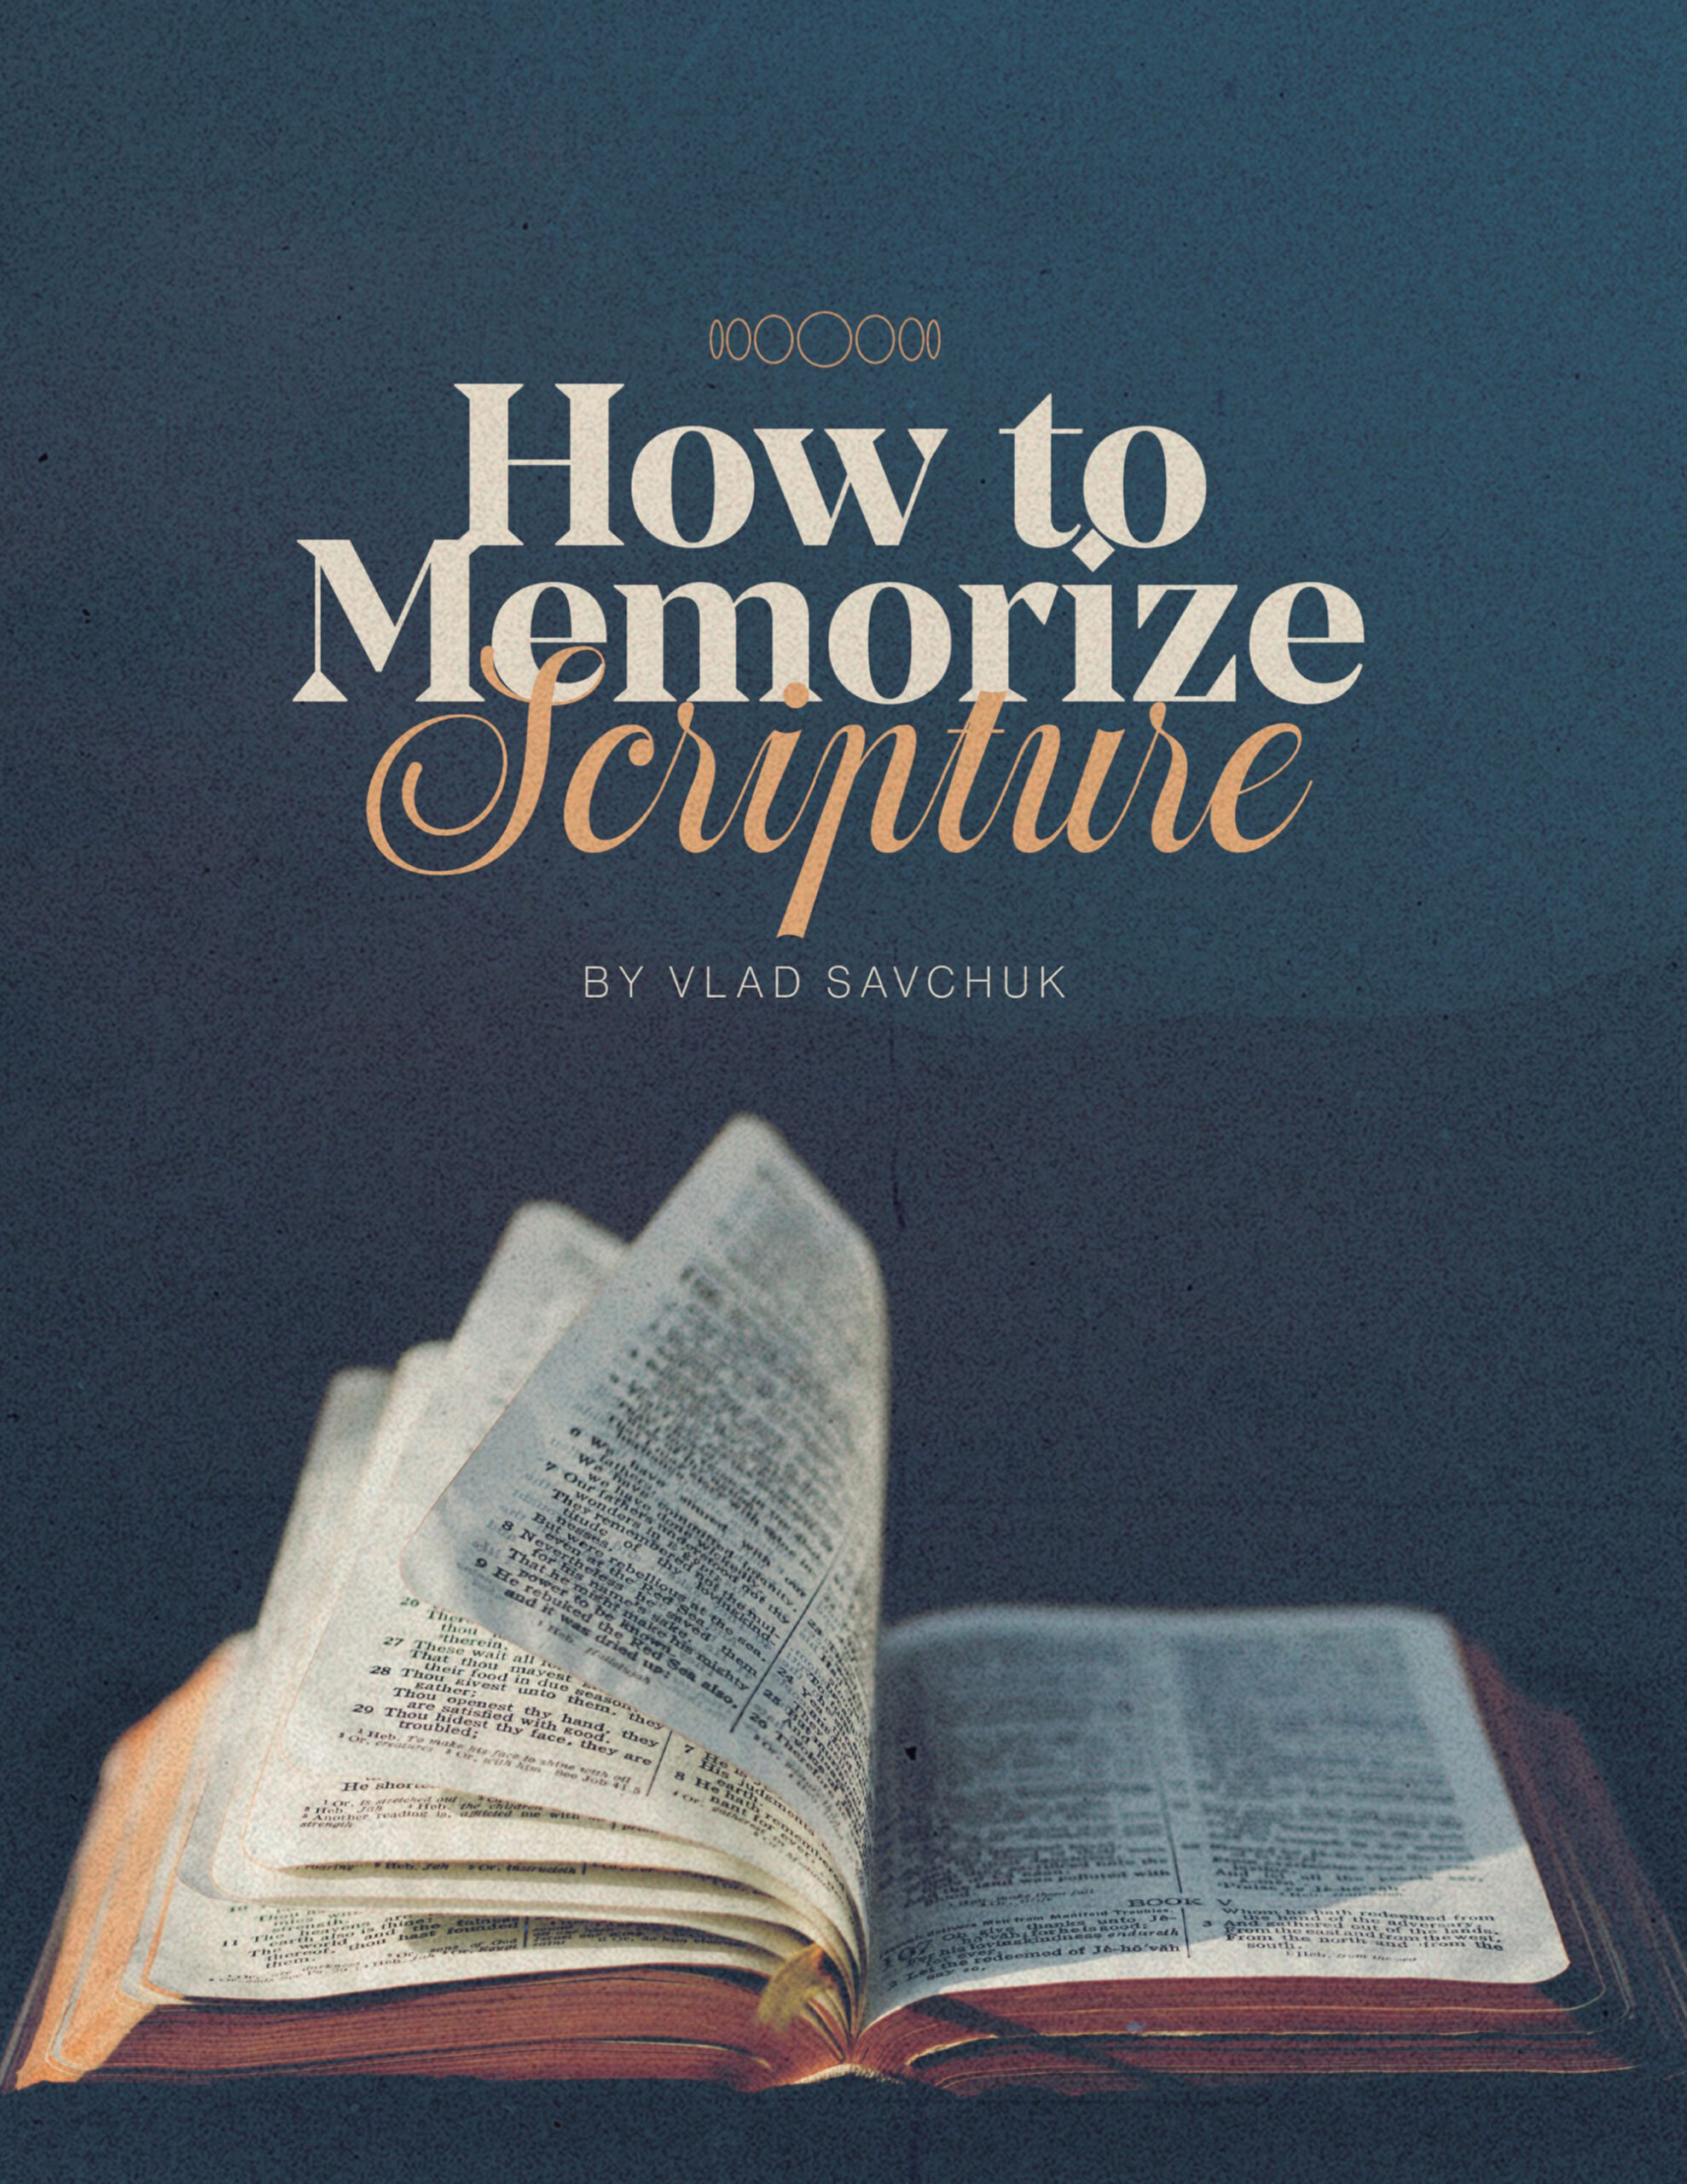 Featured Image for “How to Memorize Scripture”